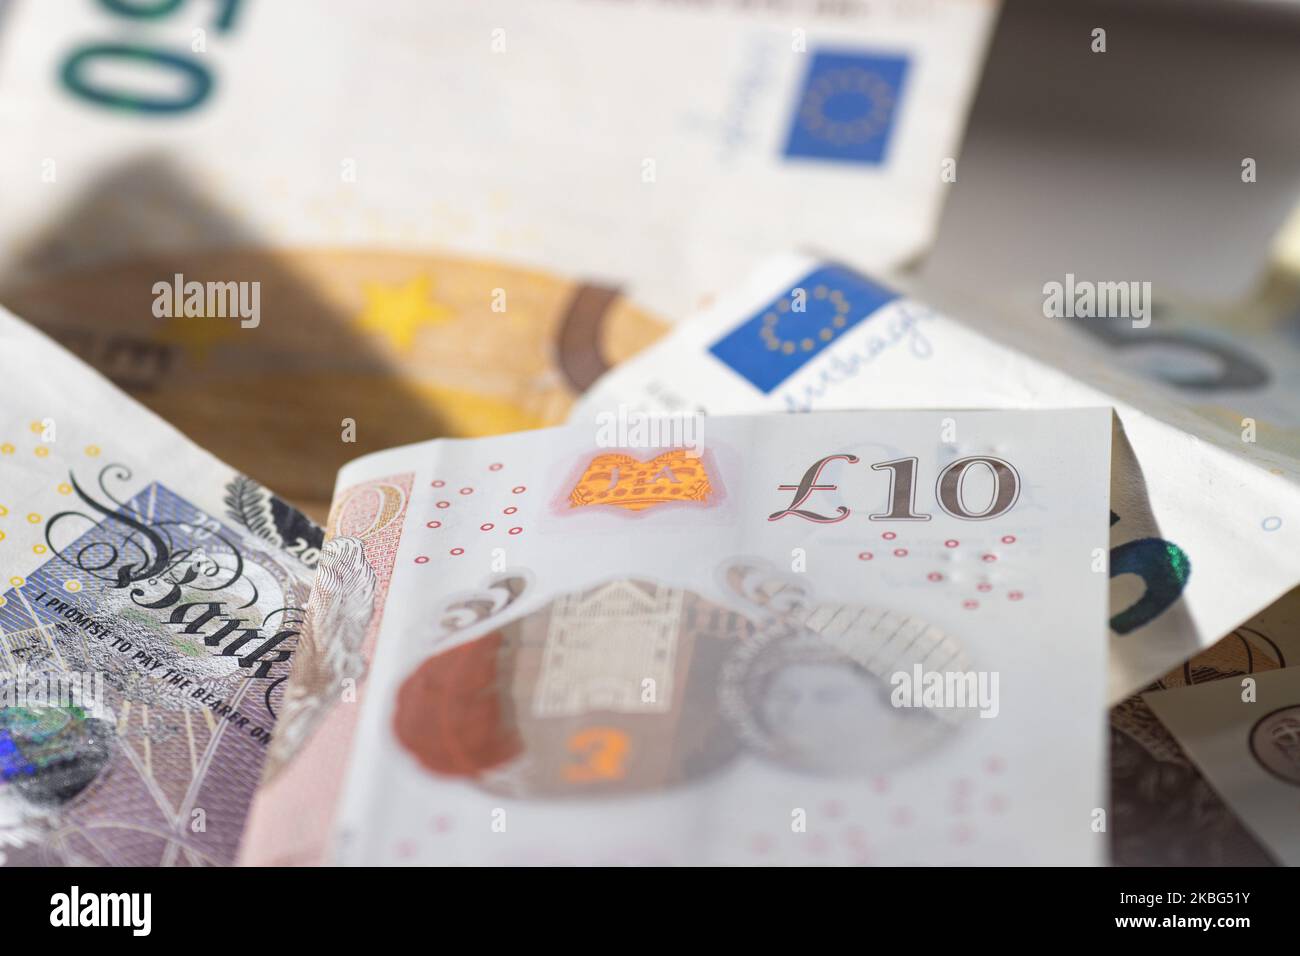 Currency, exchange rate, illustration photo mix of money, Sterling / British Pound GBP and Euro EUR banknotes paper bills and coin at close up pictures after the Brexit. Amsterdam, Netherlands - 02 02 2020 (Photo by Nicolas Economou/NurPhoto) Stock Photo